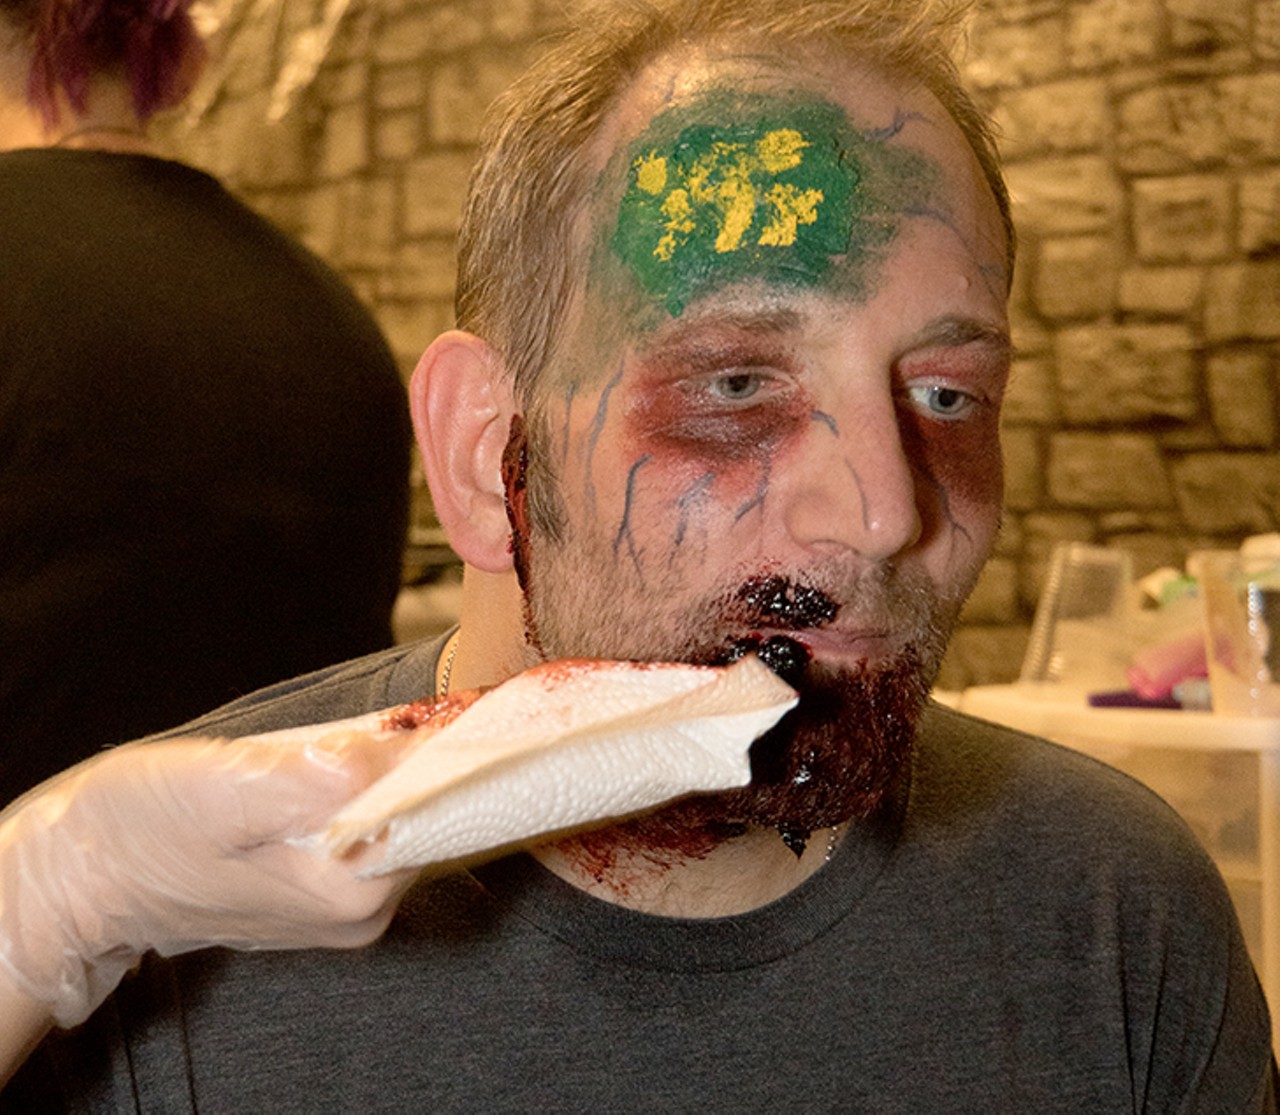 Watch our writer become a zombie for Tampa Bay's Scream-A-Geddon Halloween attraction